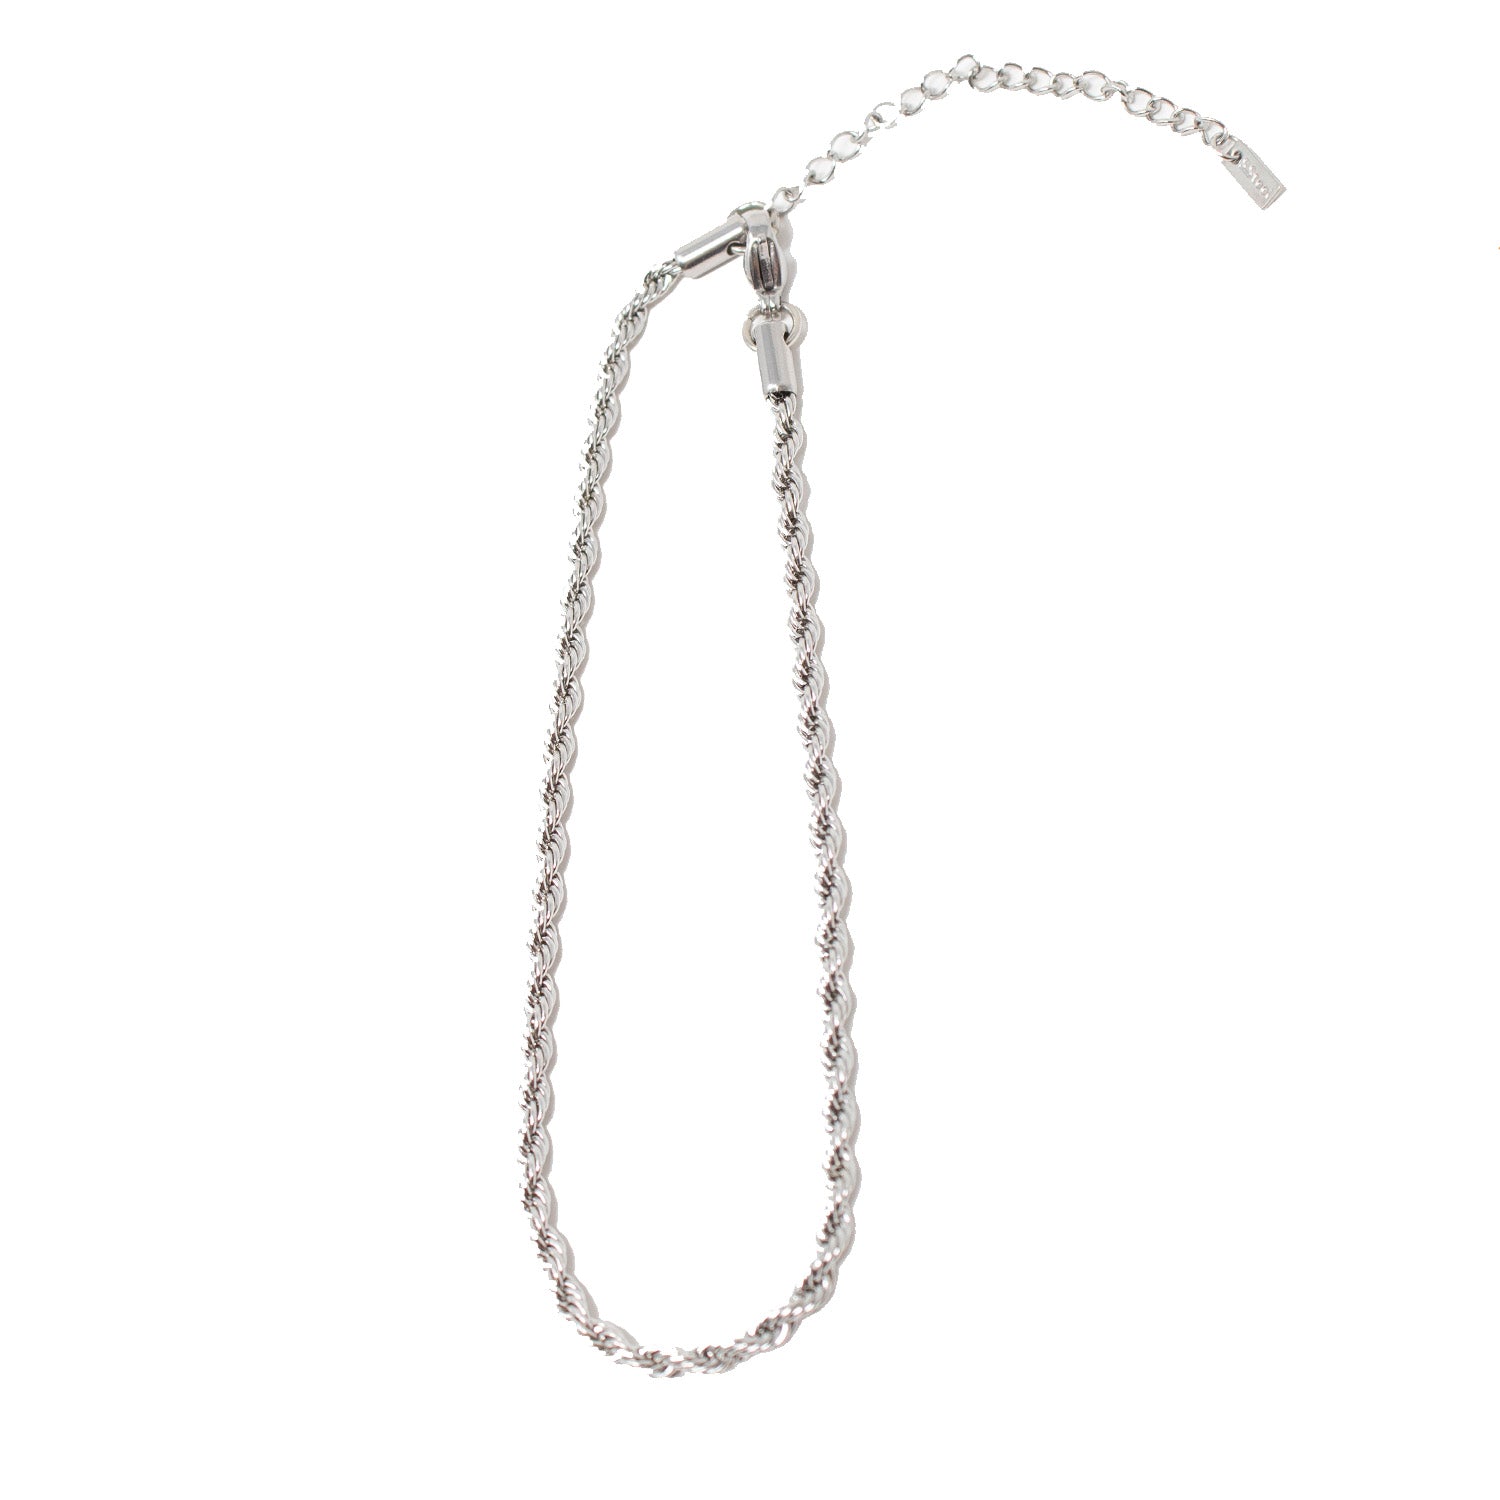 Runner Island Silver Twisted Rope Anklet 9 inch - Waterproof - Sweat Resistant